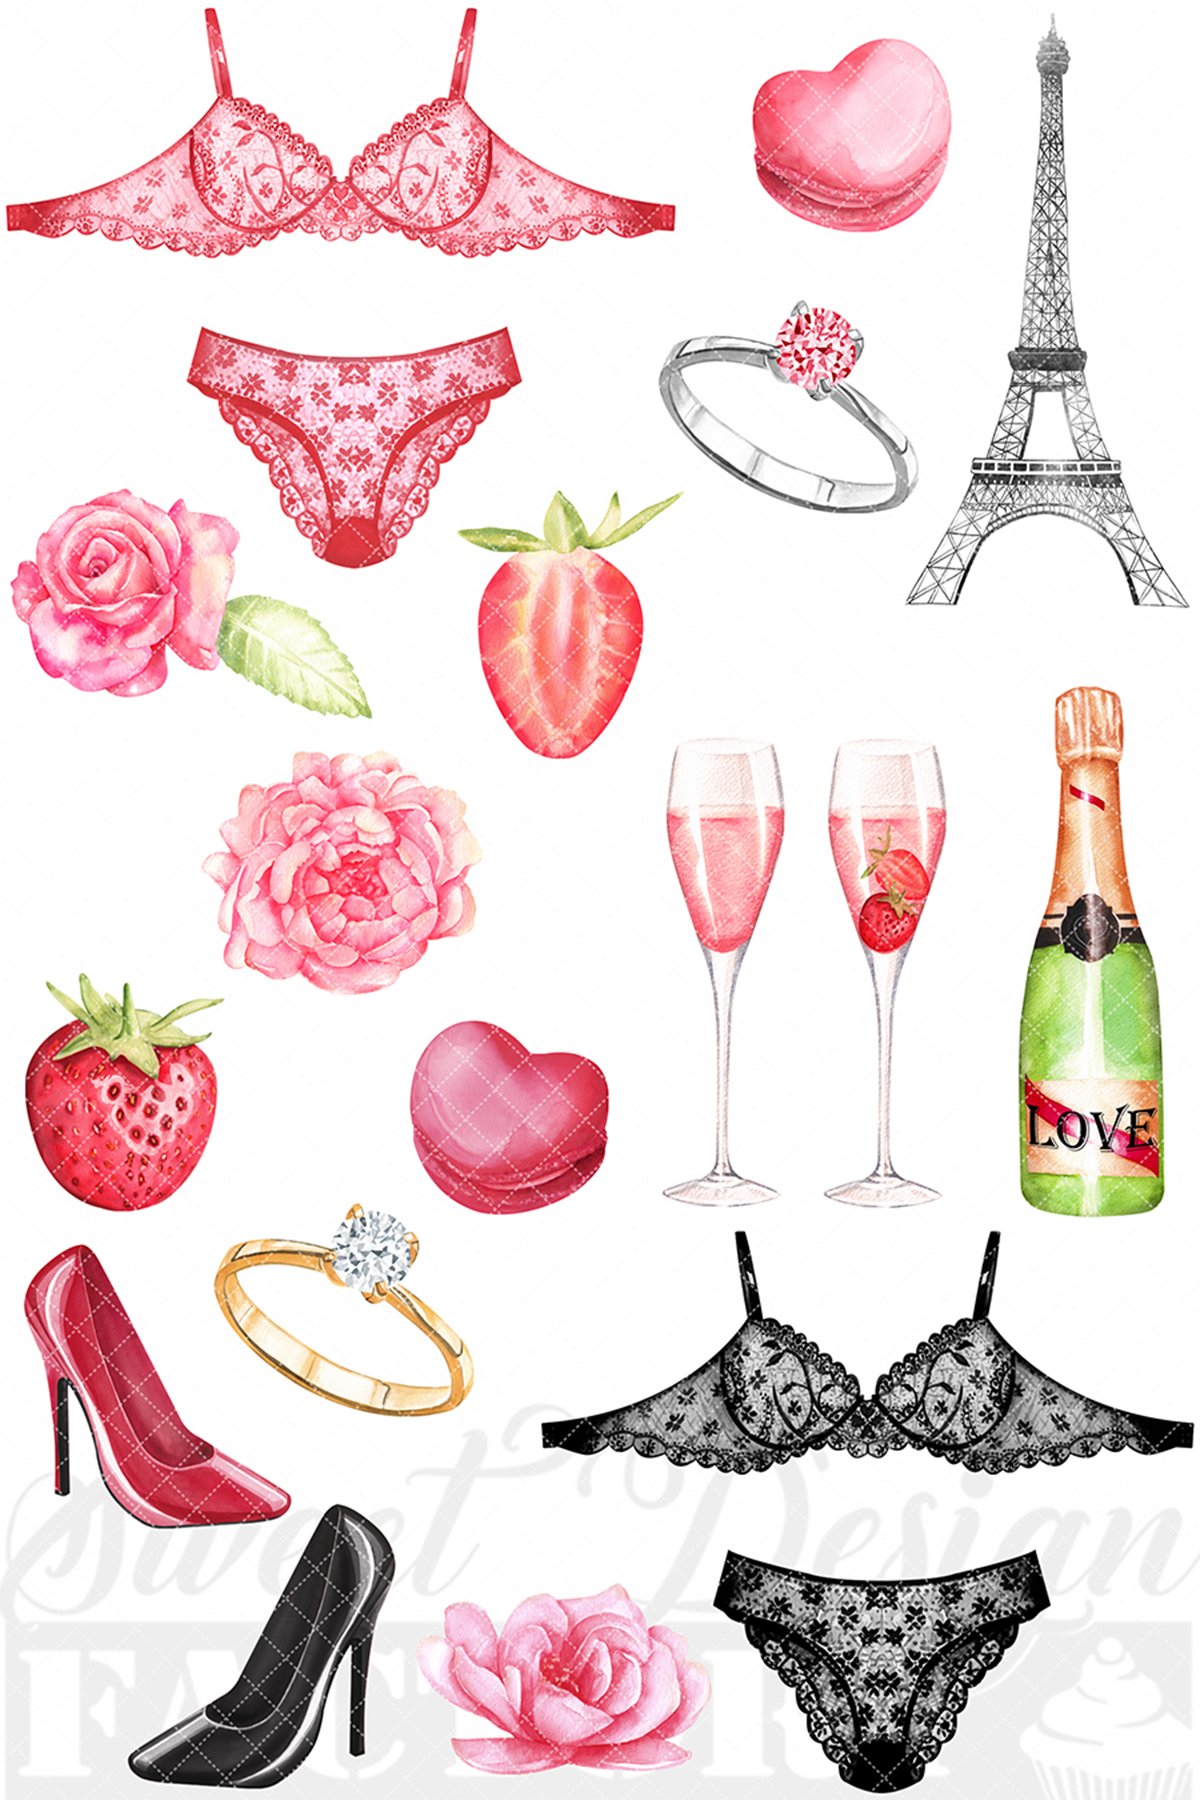 So romantic illustration with a lingerie and ring.